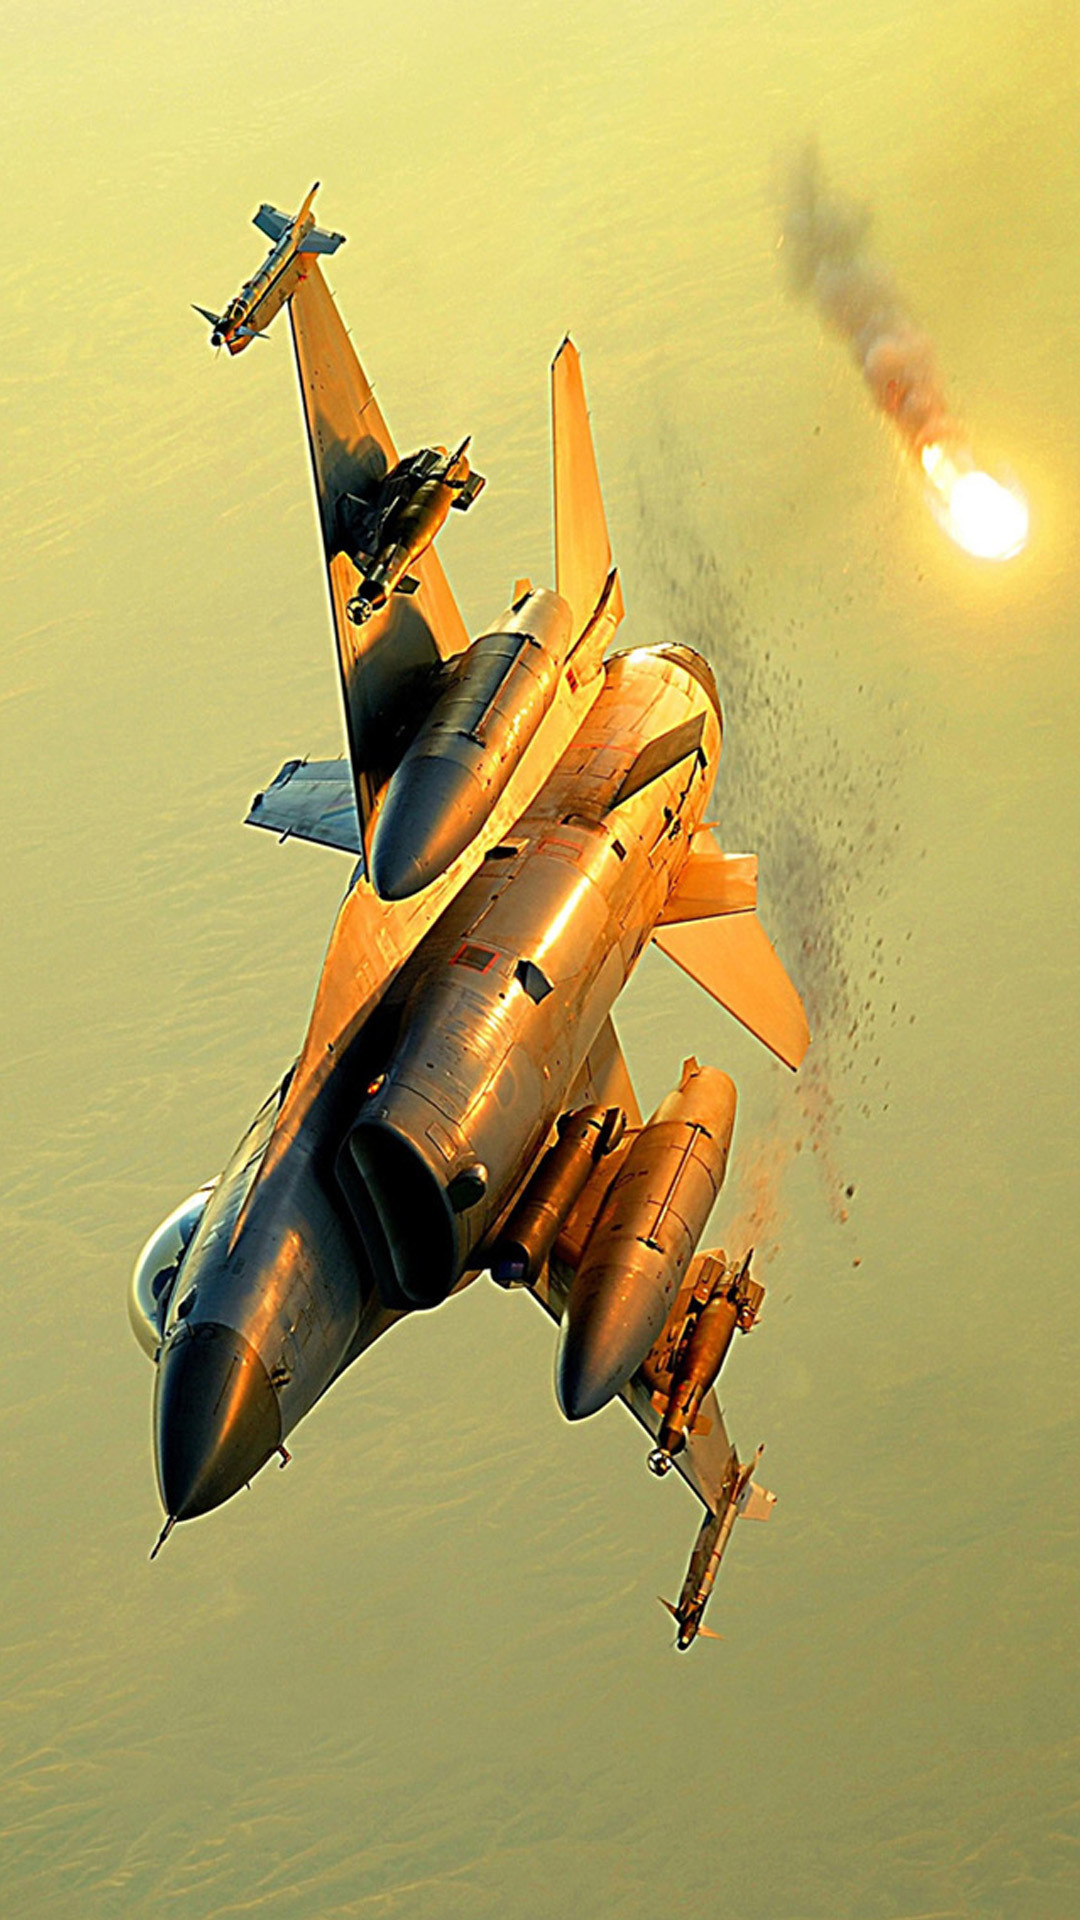 1080x1920 Fly fighter up iPhone 6 Wallpaper | Airplanes, Helicopters, Jets |  Pinterest | Airplanes and Cars